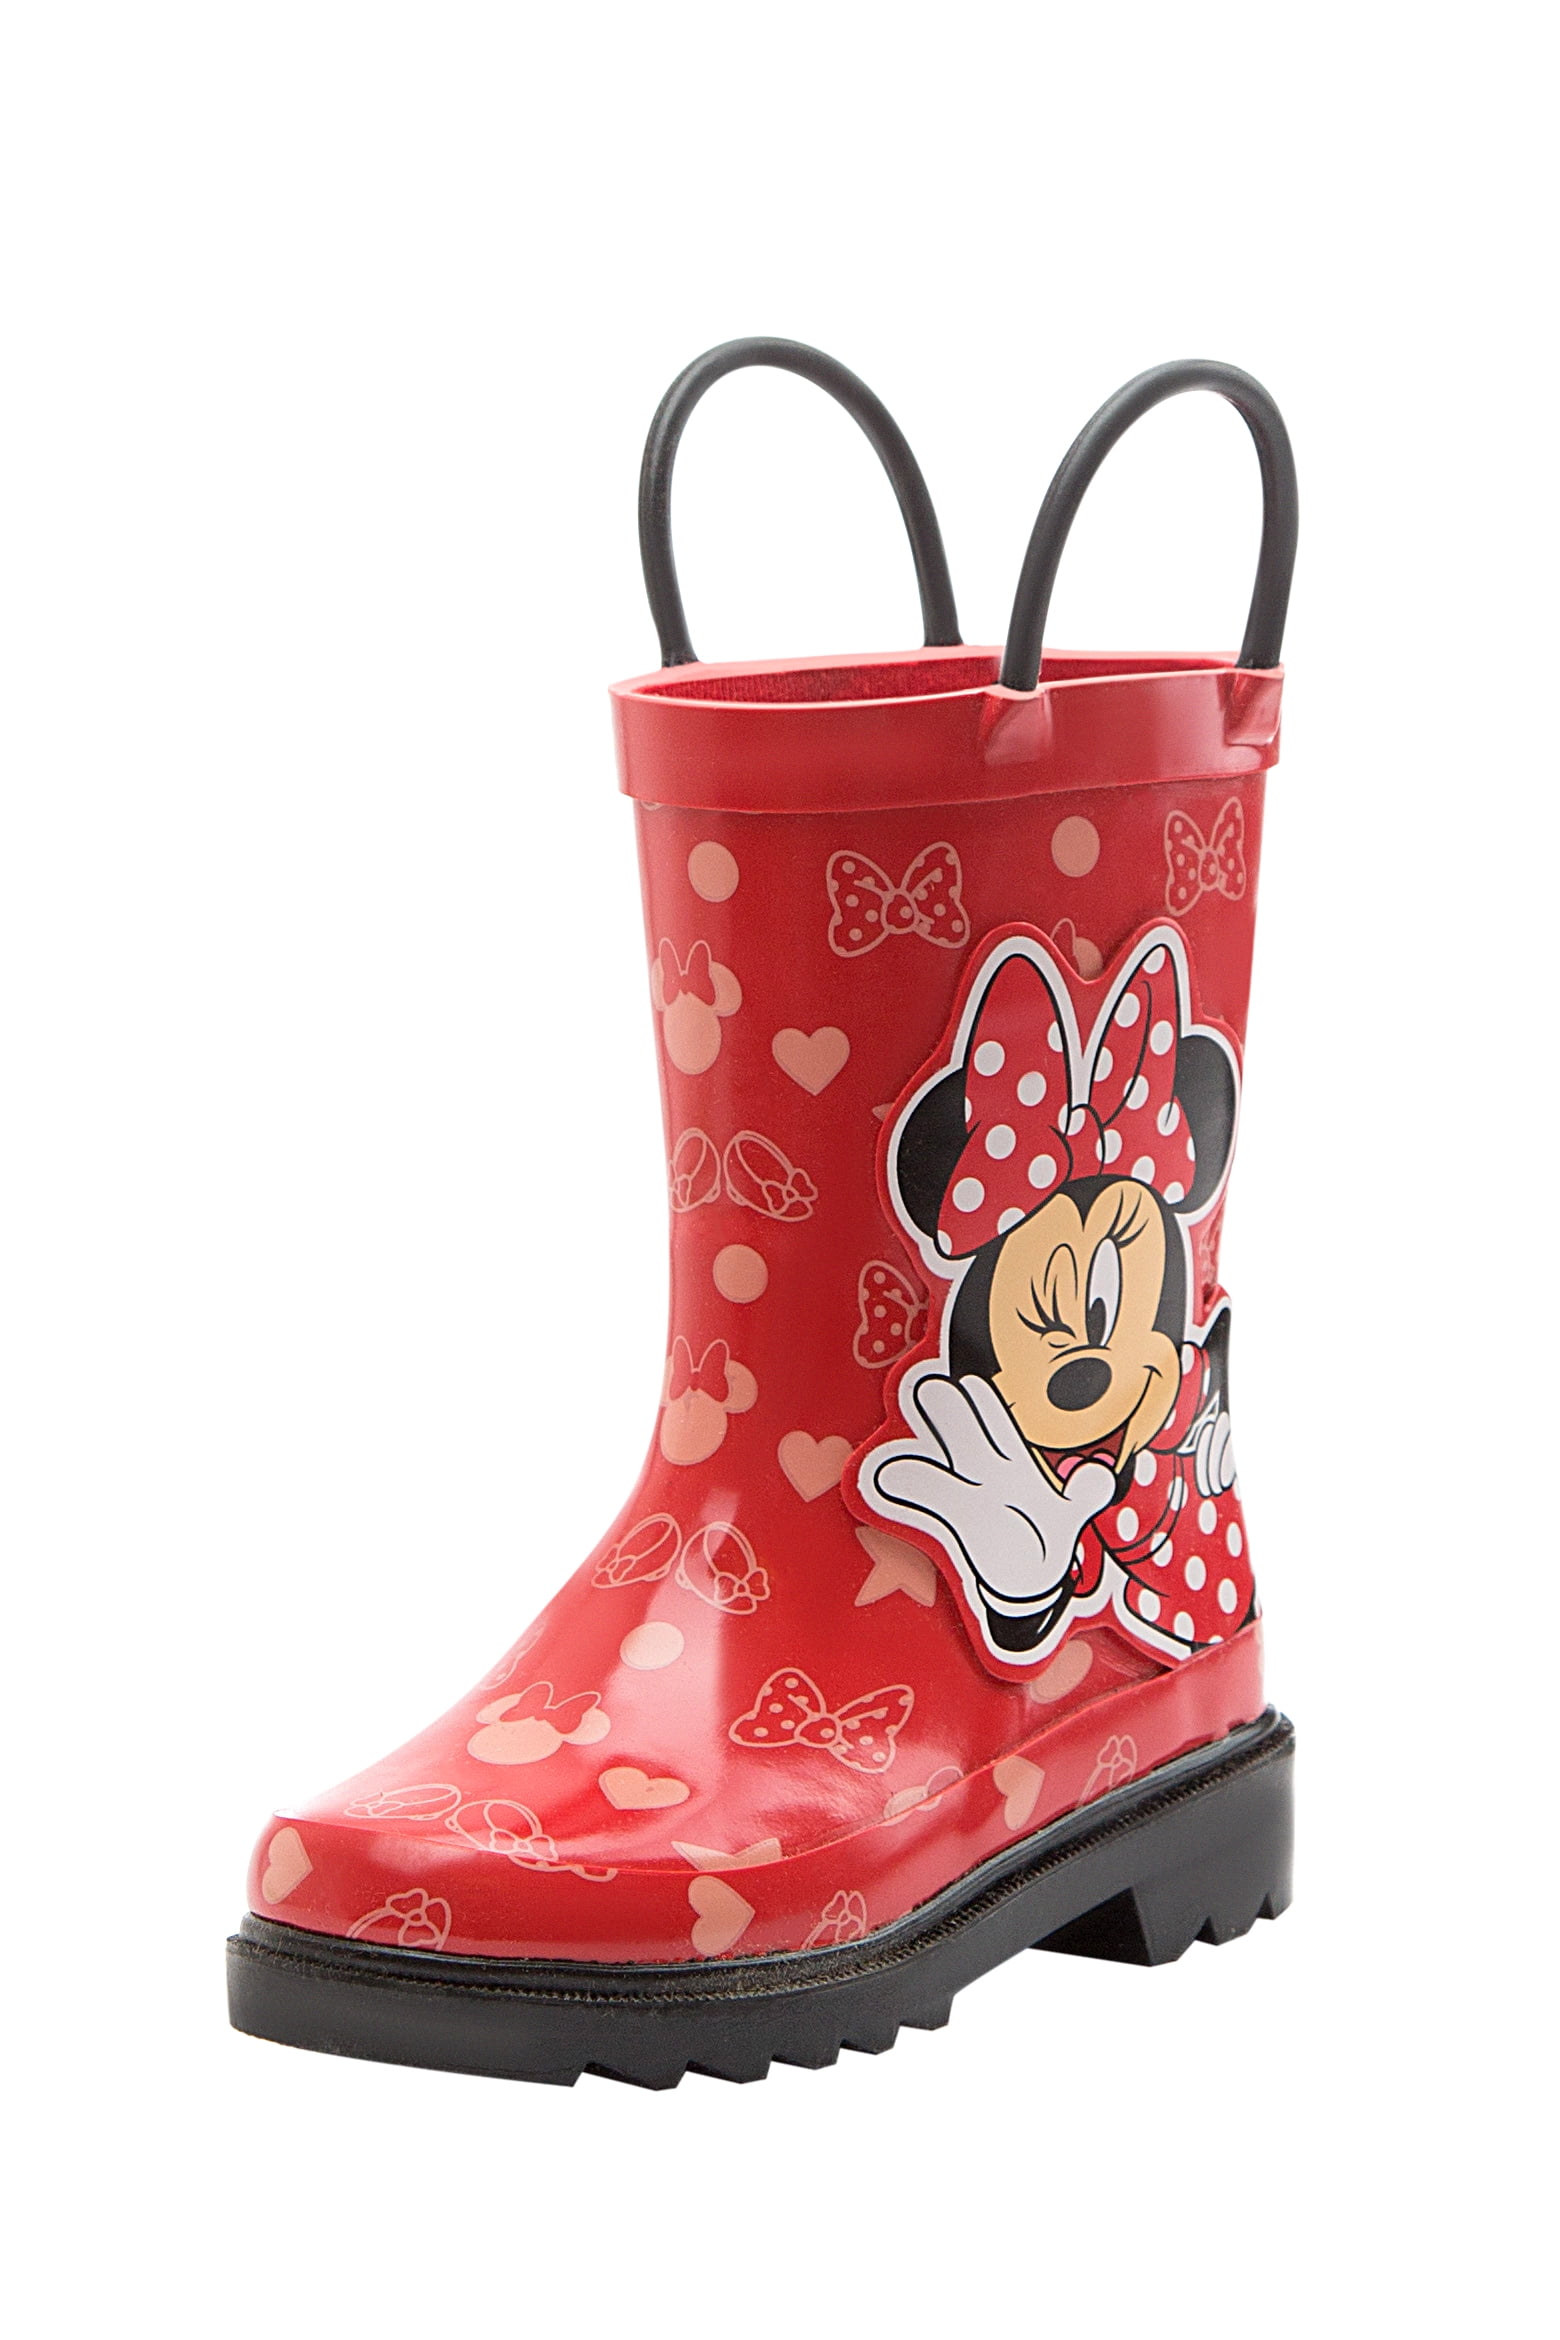 Details about   Girls Minnie & Mickey Mouse Black Jelly Shoes Toddler Size 10, 